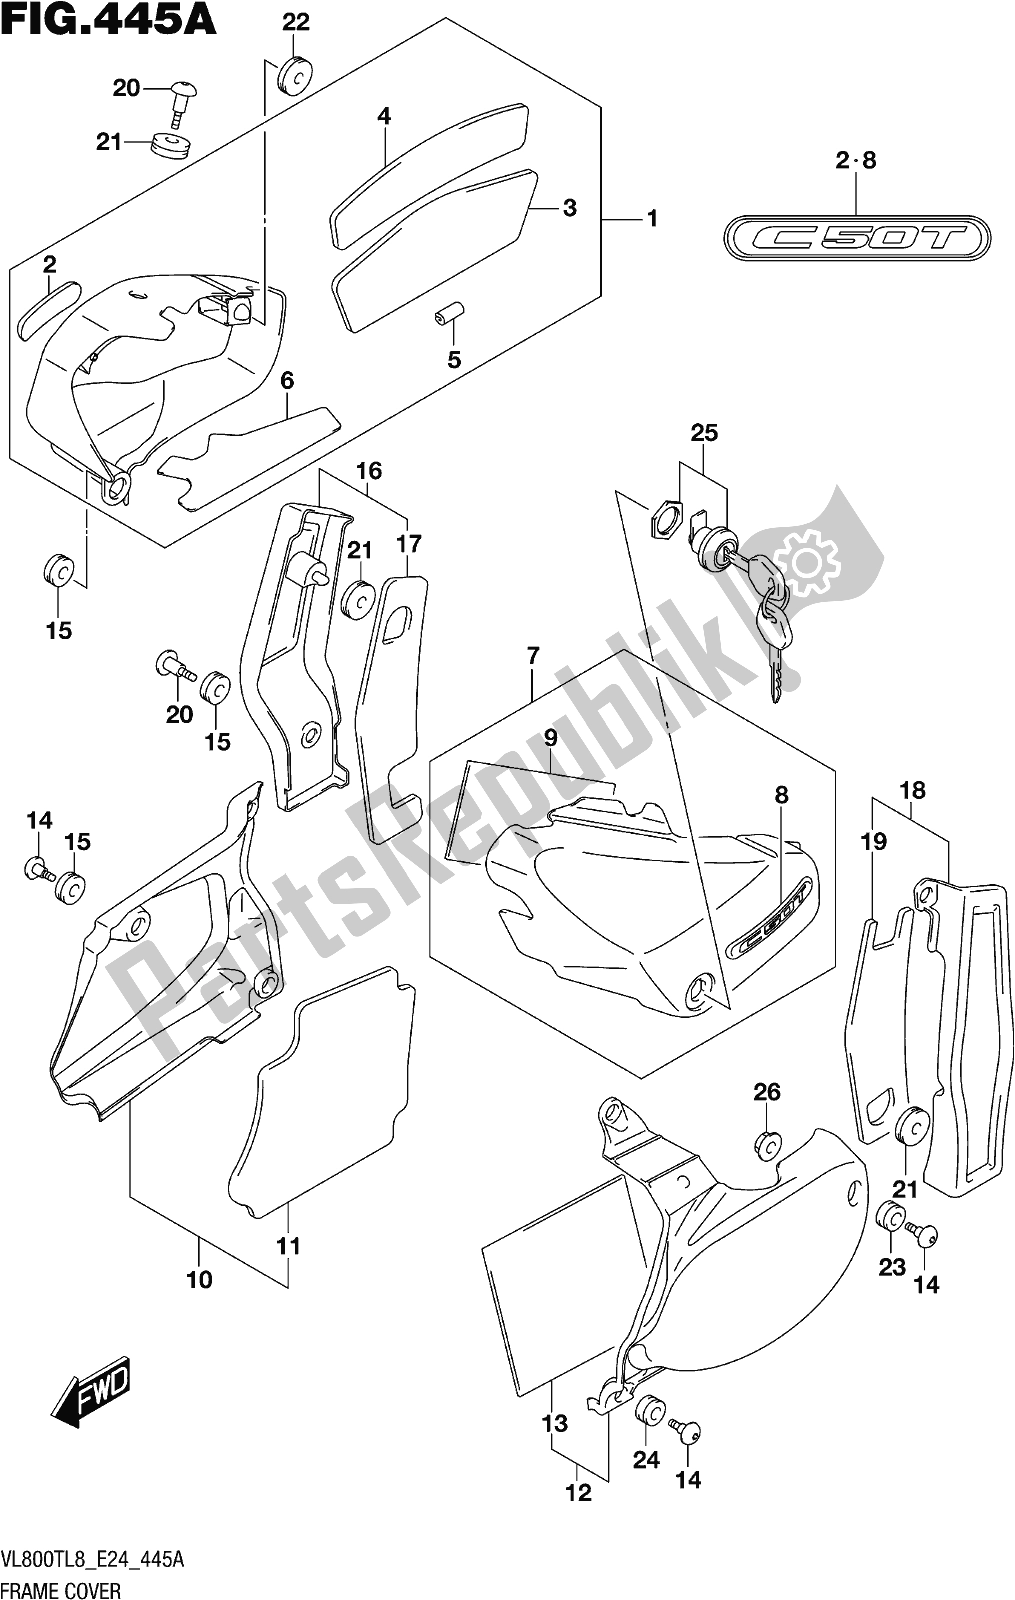 All parts for the Fig. 445a Frame Cover of the Suzuki VL 800T 2018